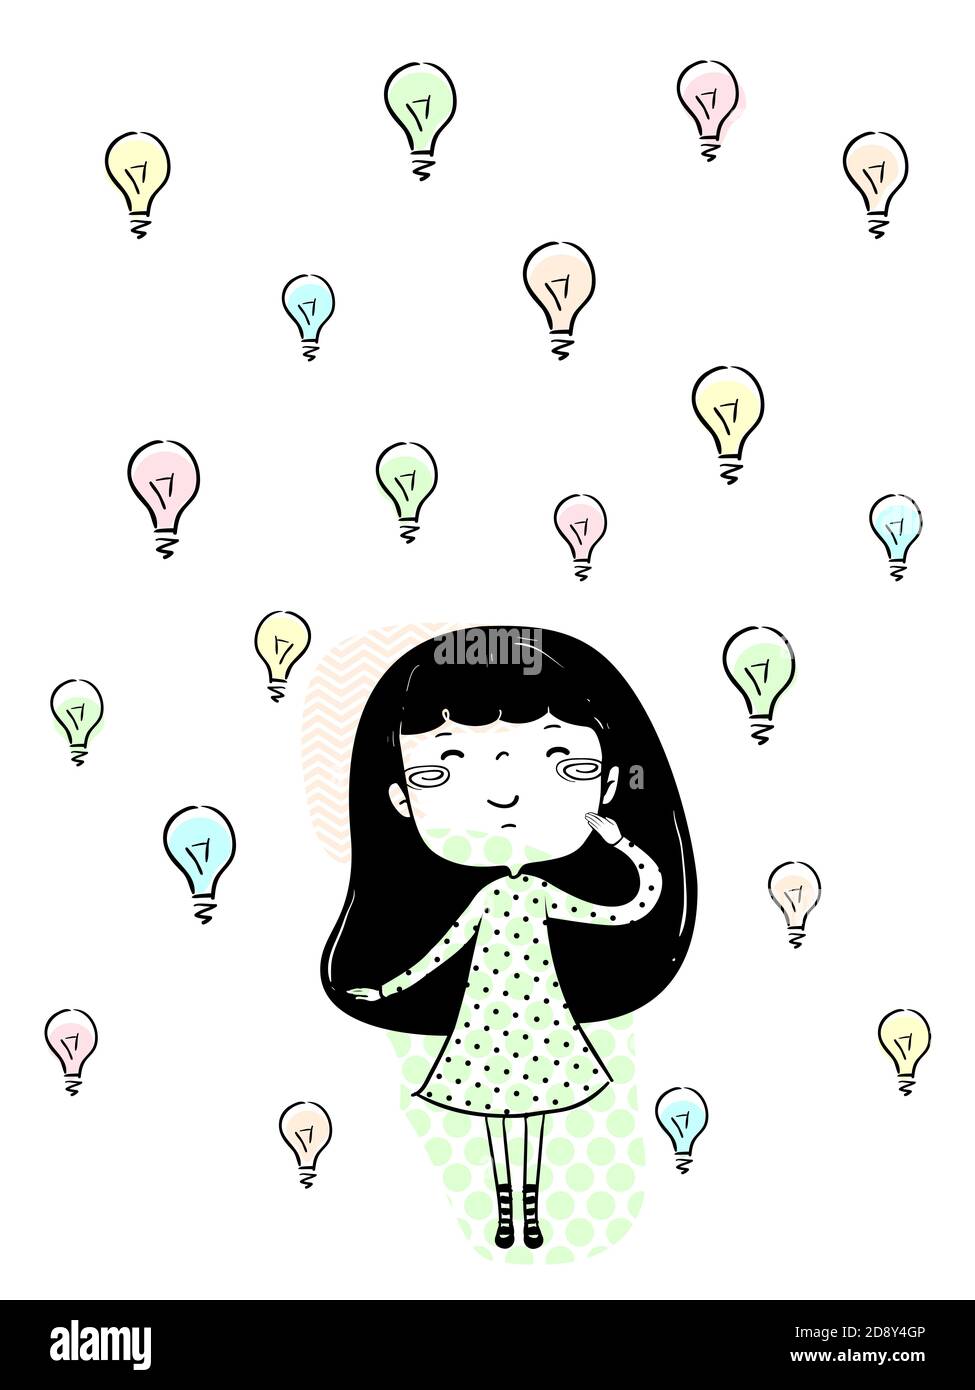 Illustration of a Kid Girl Looking Up and Seeing Light Bulbs Stock Photo